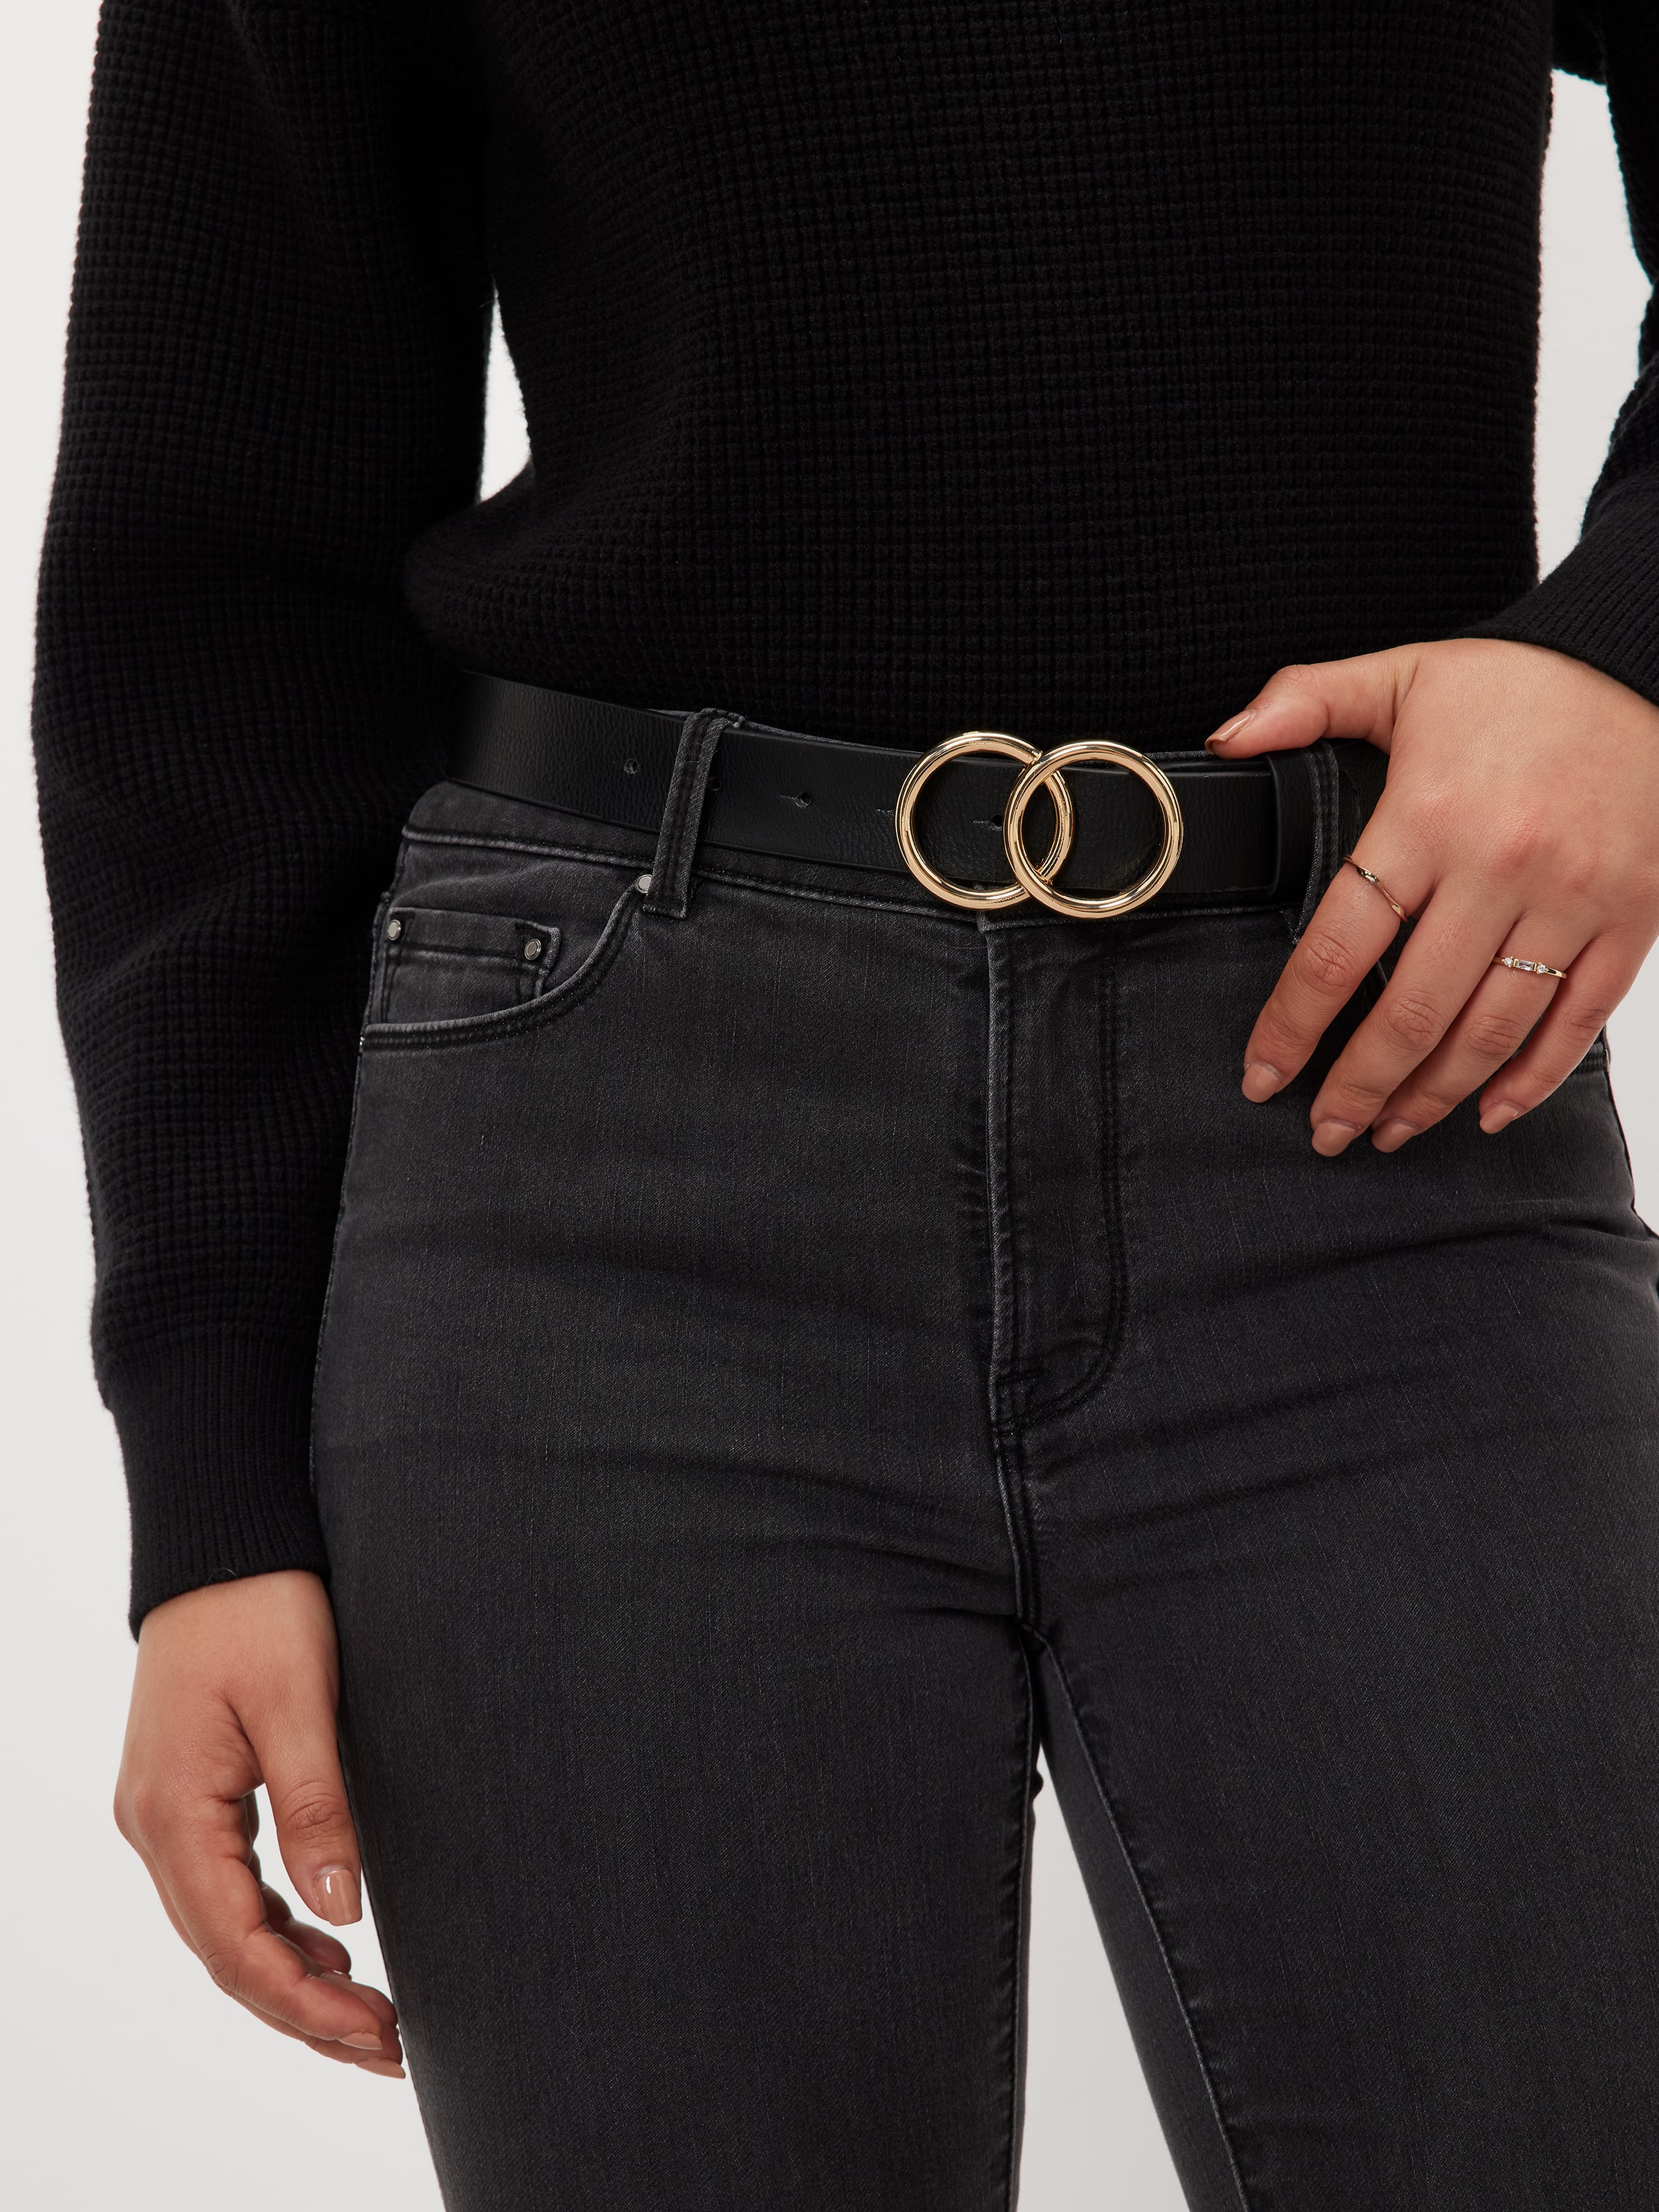 BKE Reversible Double Circle Belt - Women's Belts in Gold Taupe